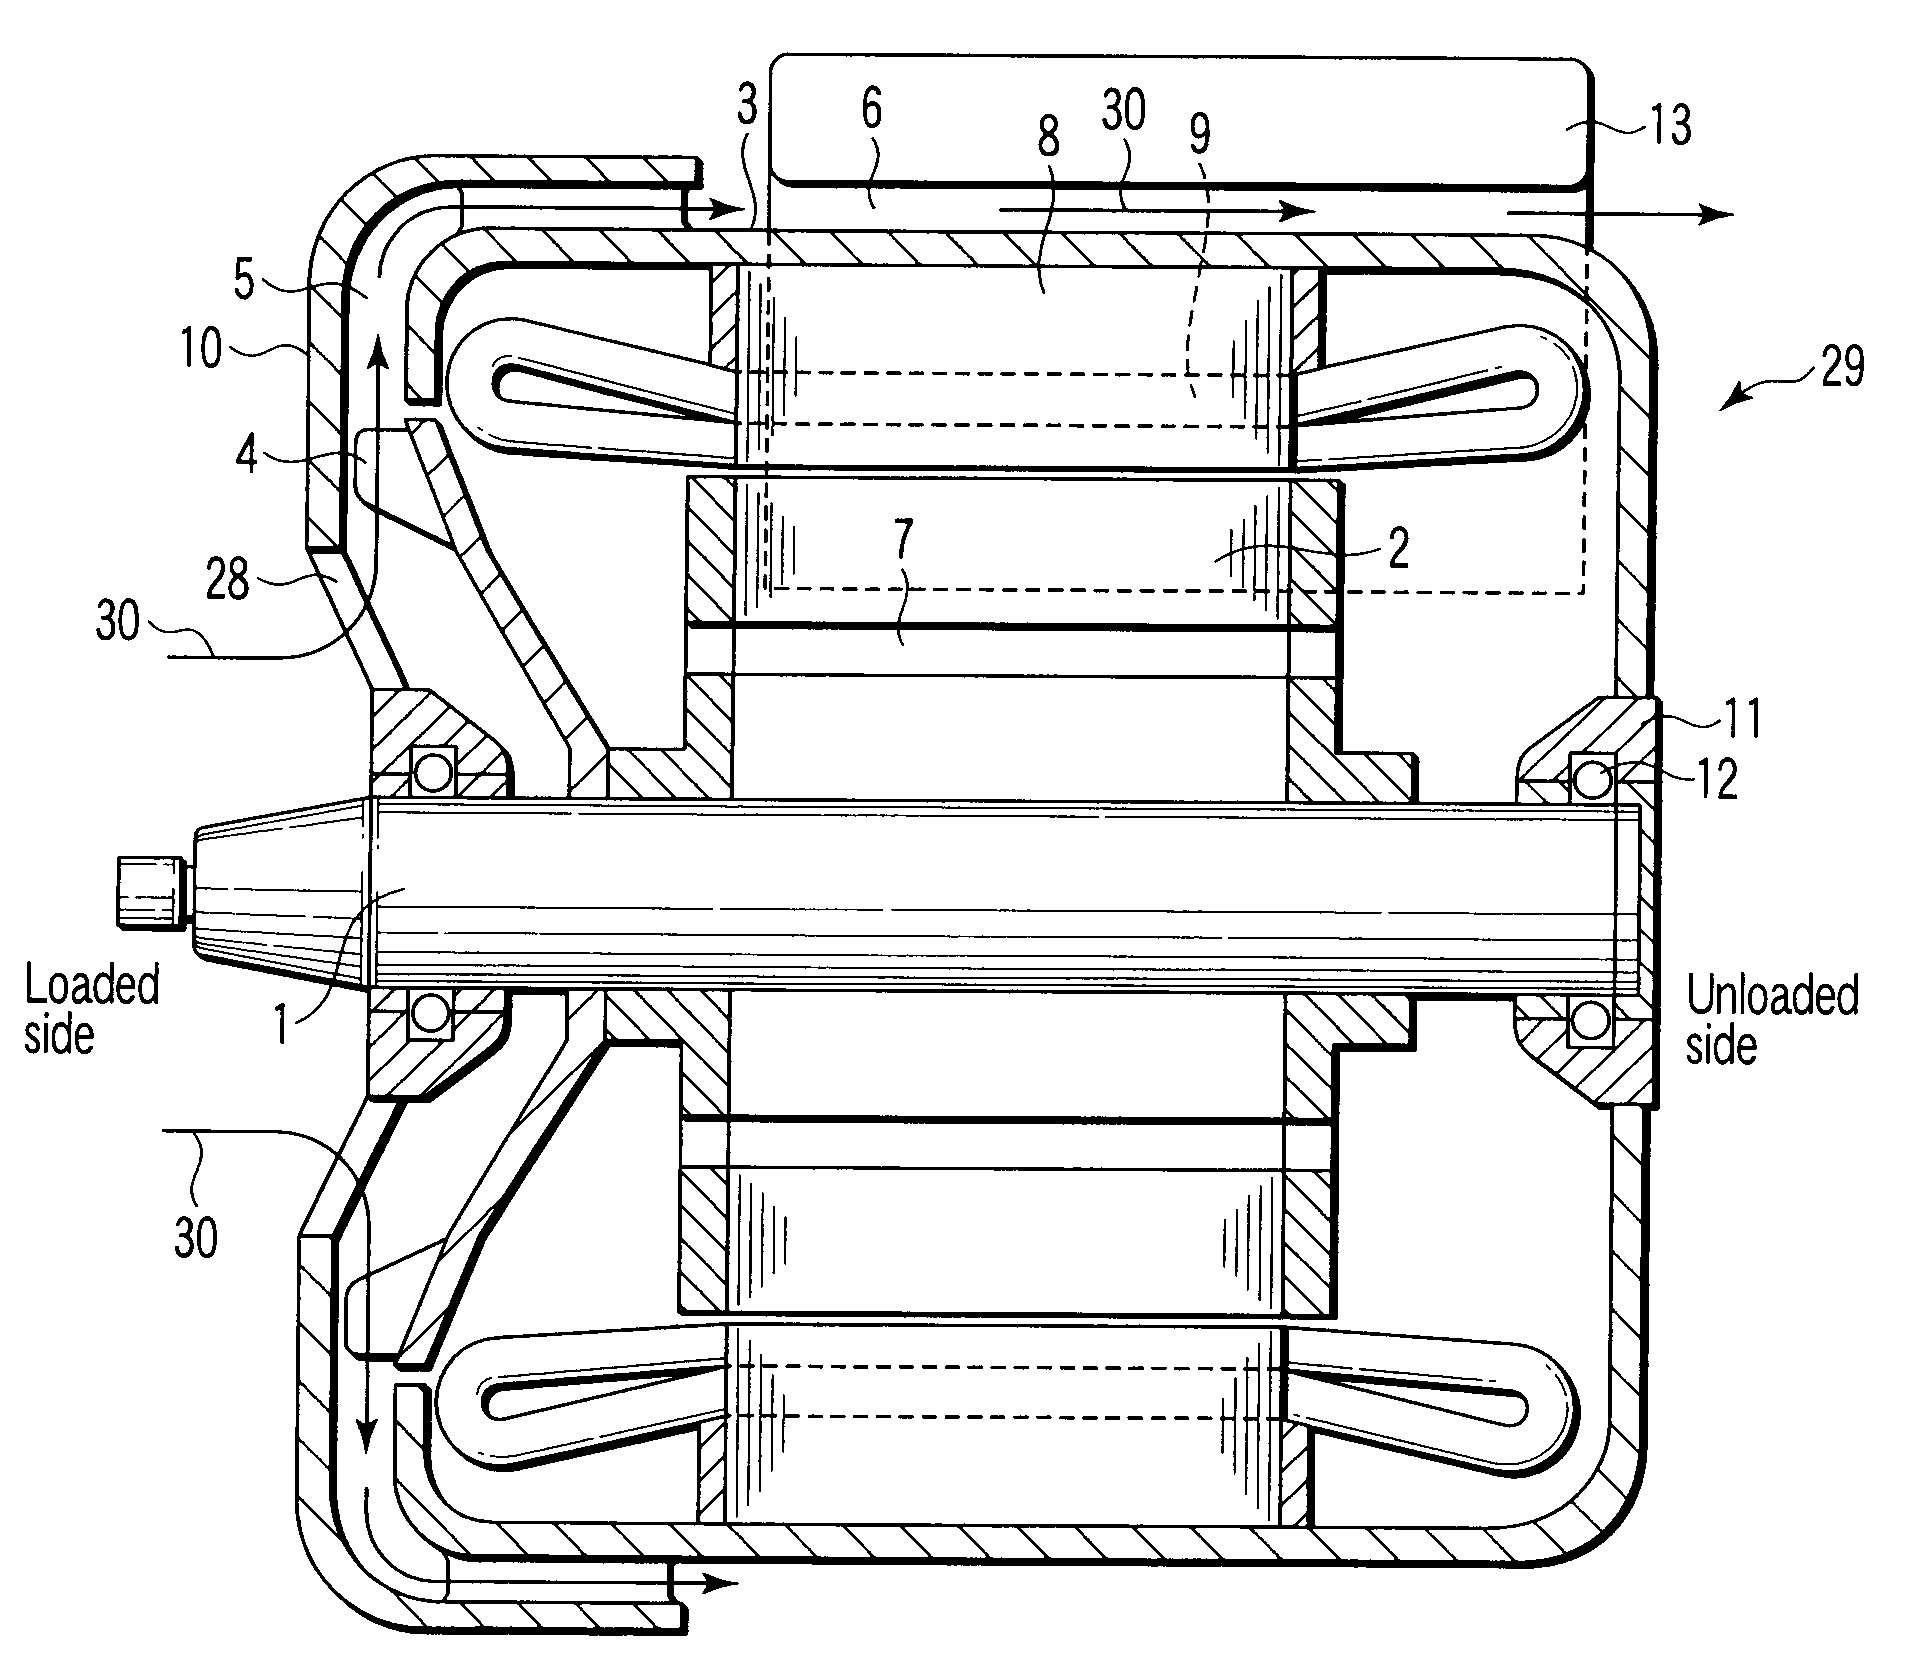 Apparatus for controller-integrated motor